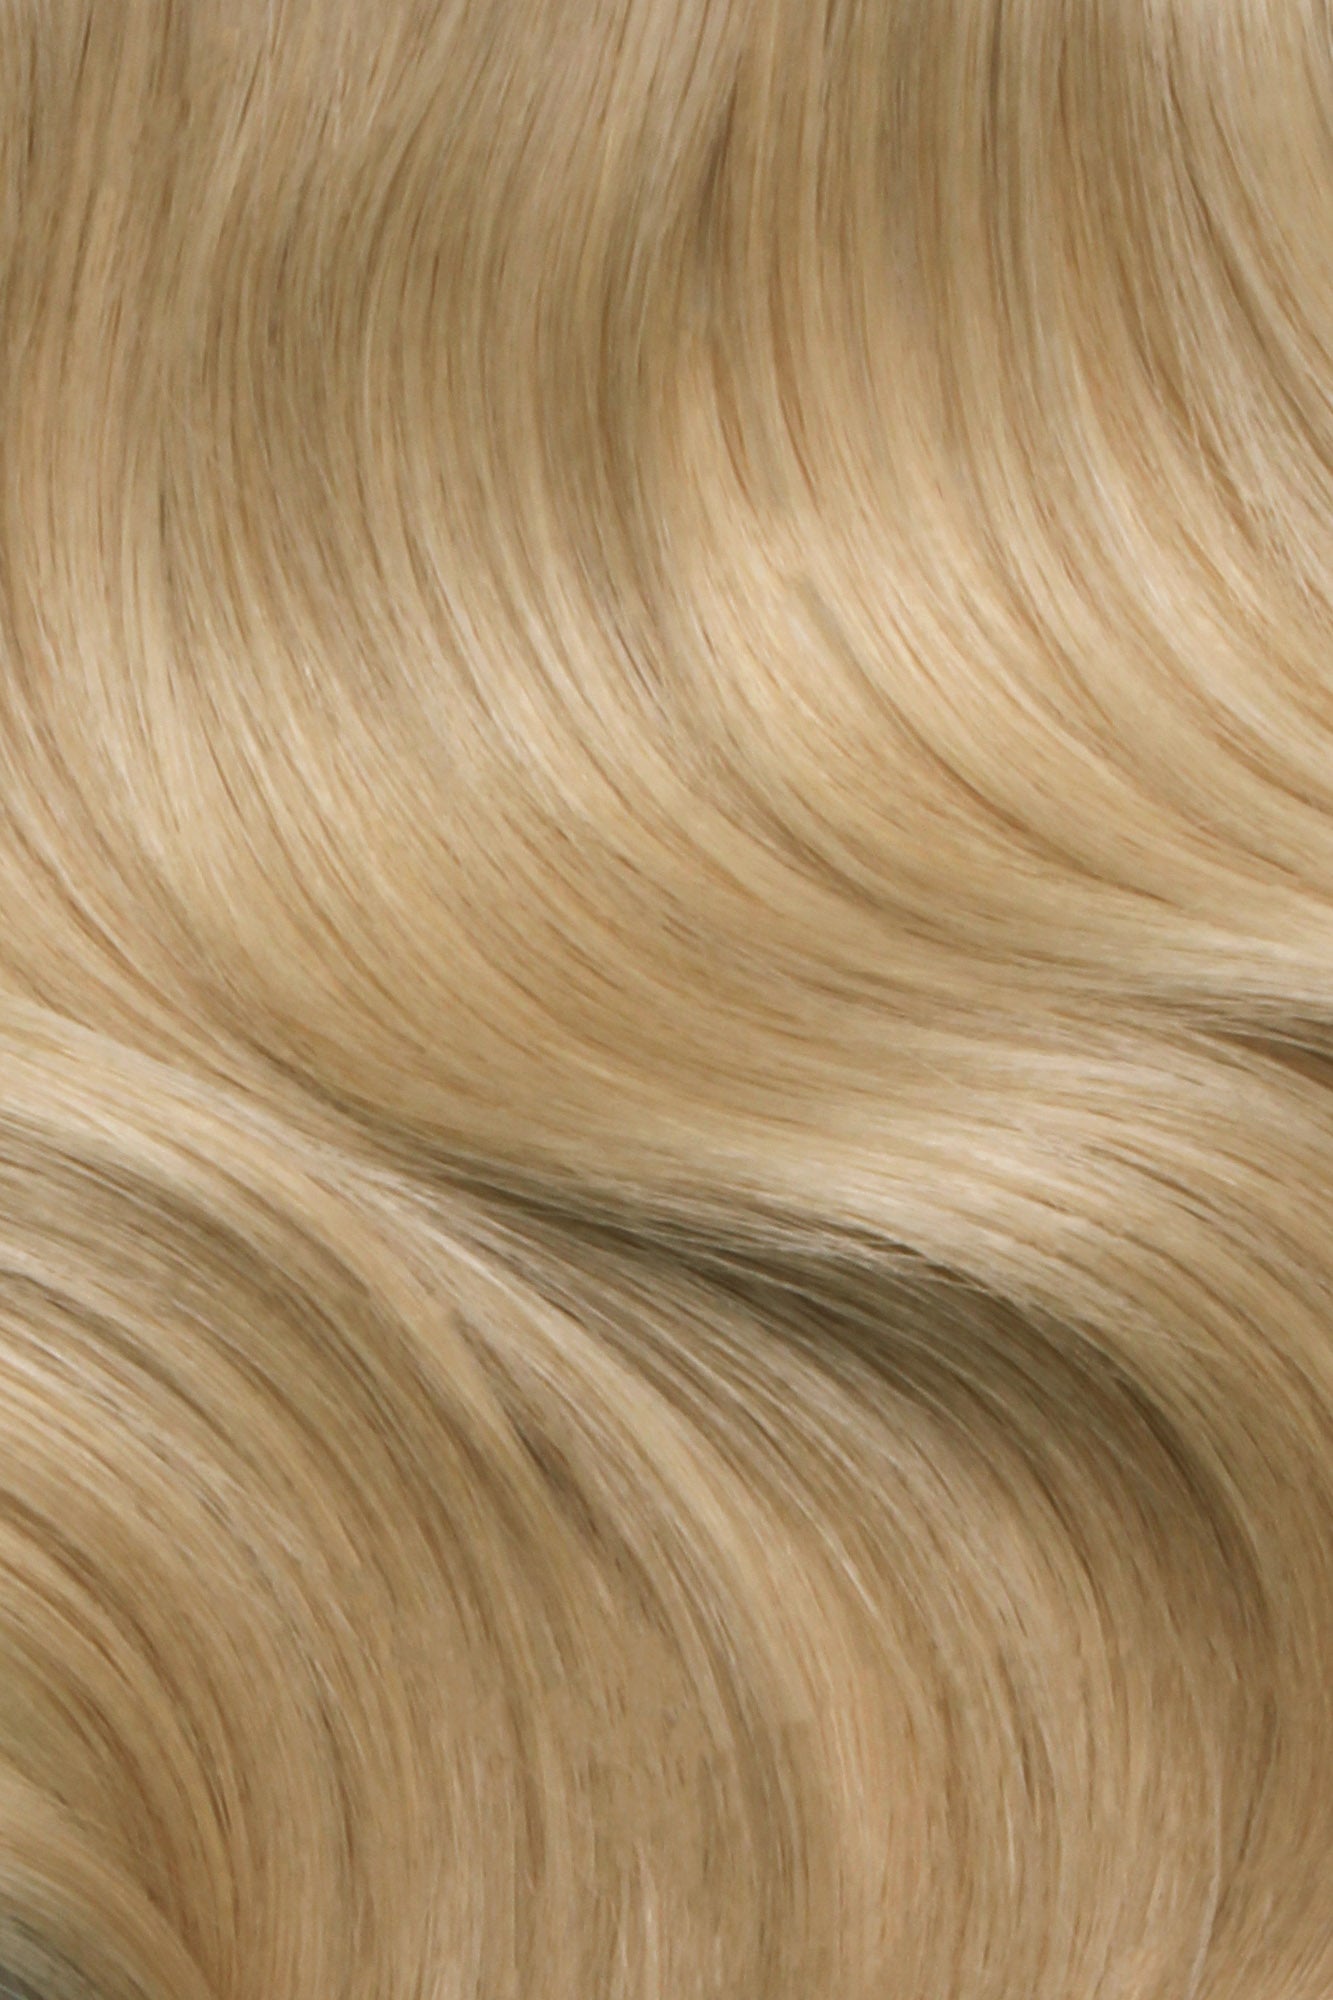 Tiny Tip Bonds 18&quot; -  SWAY Hair Extensions Beach-Ash-Blonde: Lightweight, discreet. Made with Italian Keratin for comfort and long-lasting wear. Reusable and compatible with other SWAY Salon Professional Methods